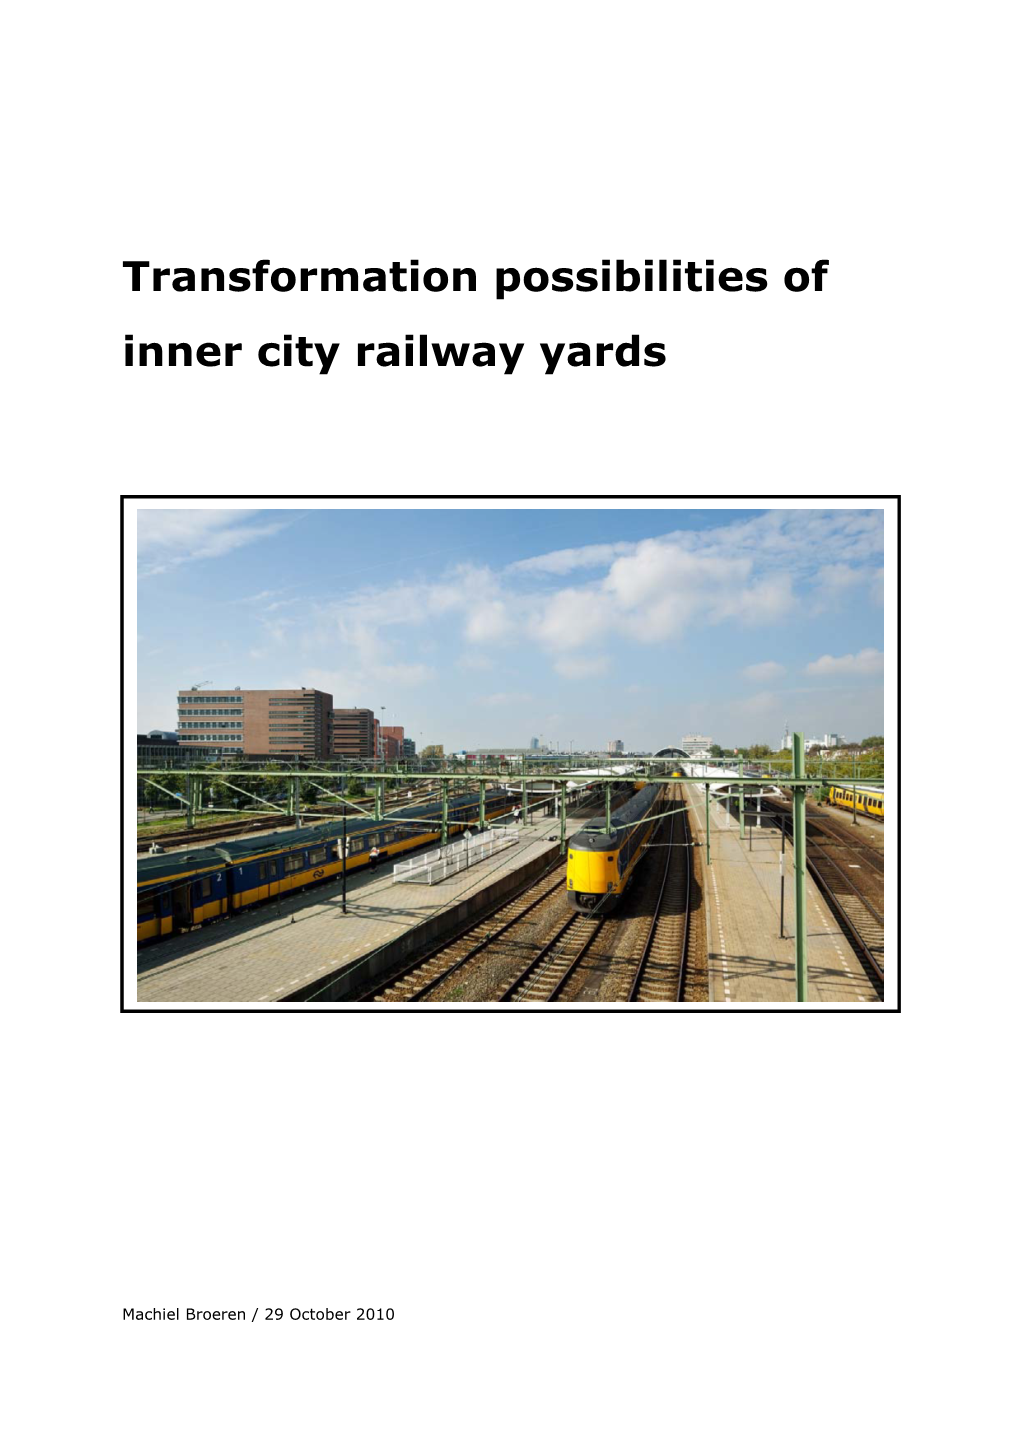 Transformation Possibilities of Inner City Railway Yards